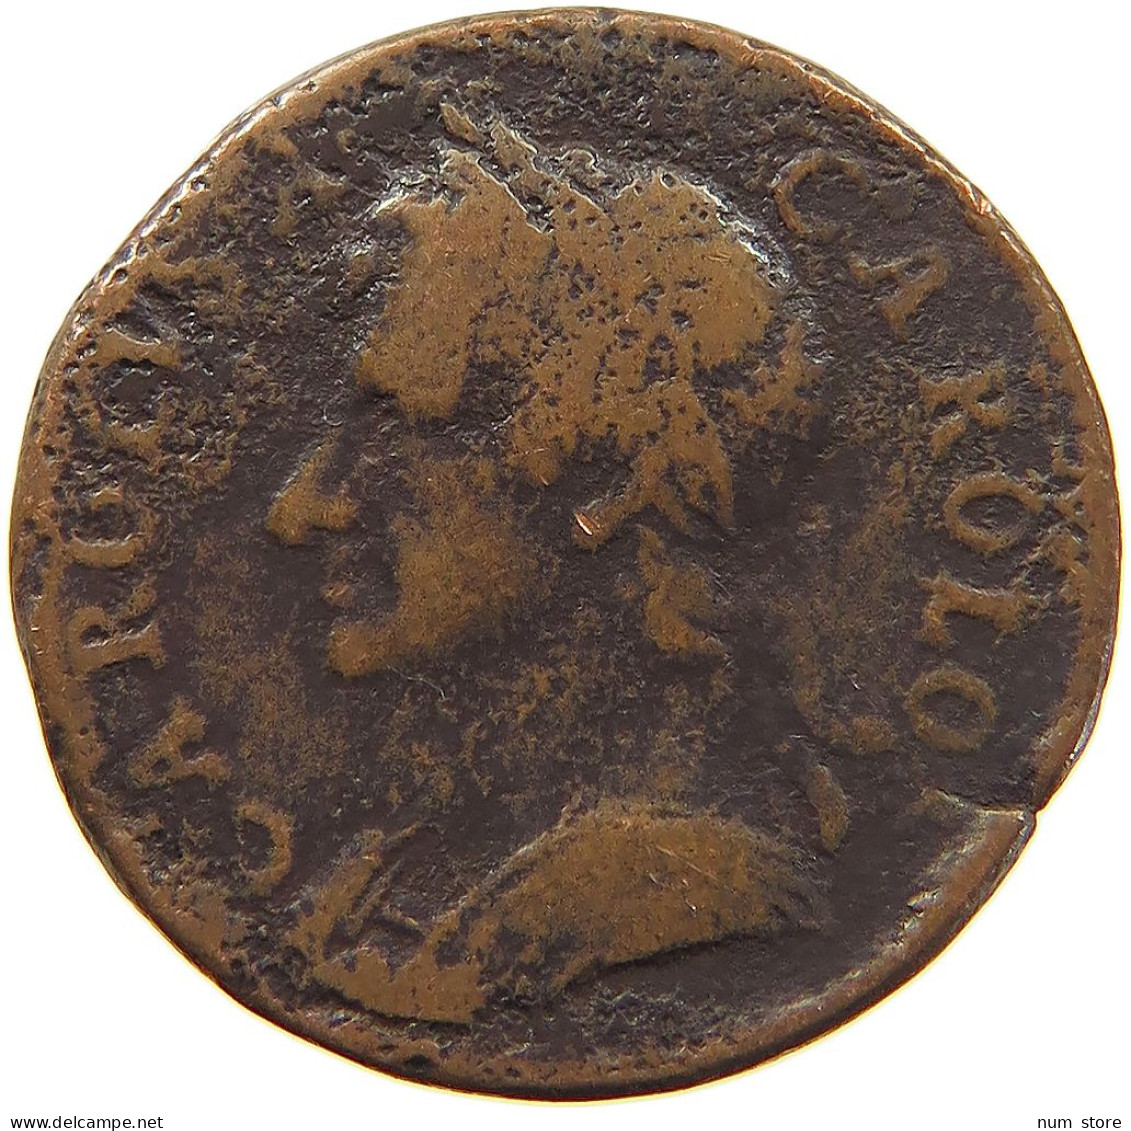 GREAT BRITAIN FARTHING  CHARLES II. (1660-1685) #MA 100940 - A. 1 Farthing